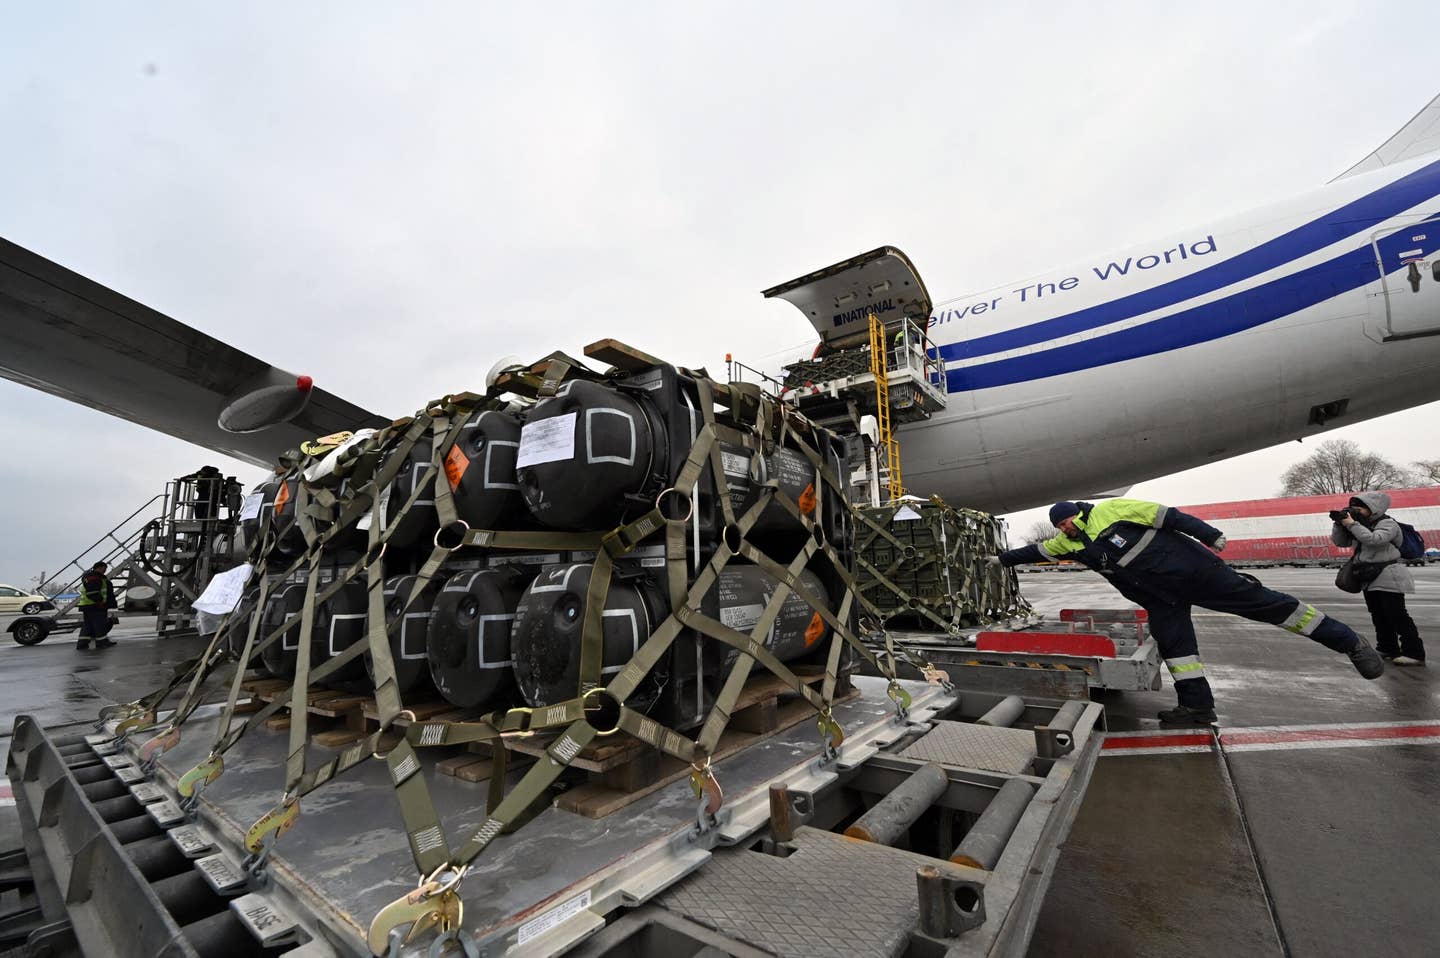 Employees unload a Boeing 747-400 cargo jet with FGM-148 Javelin missiles as part of military support to Ukraine. (Photo by Sergei SUPINSKY / AFP) (Photo by SERGEI SUPINSKY/AFP via Getty Images)